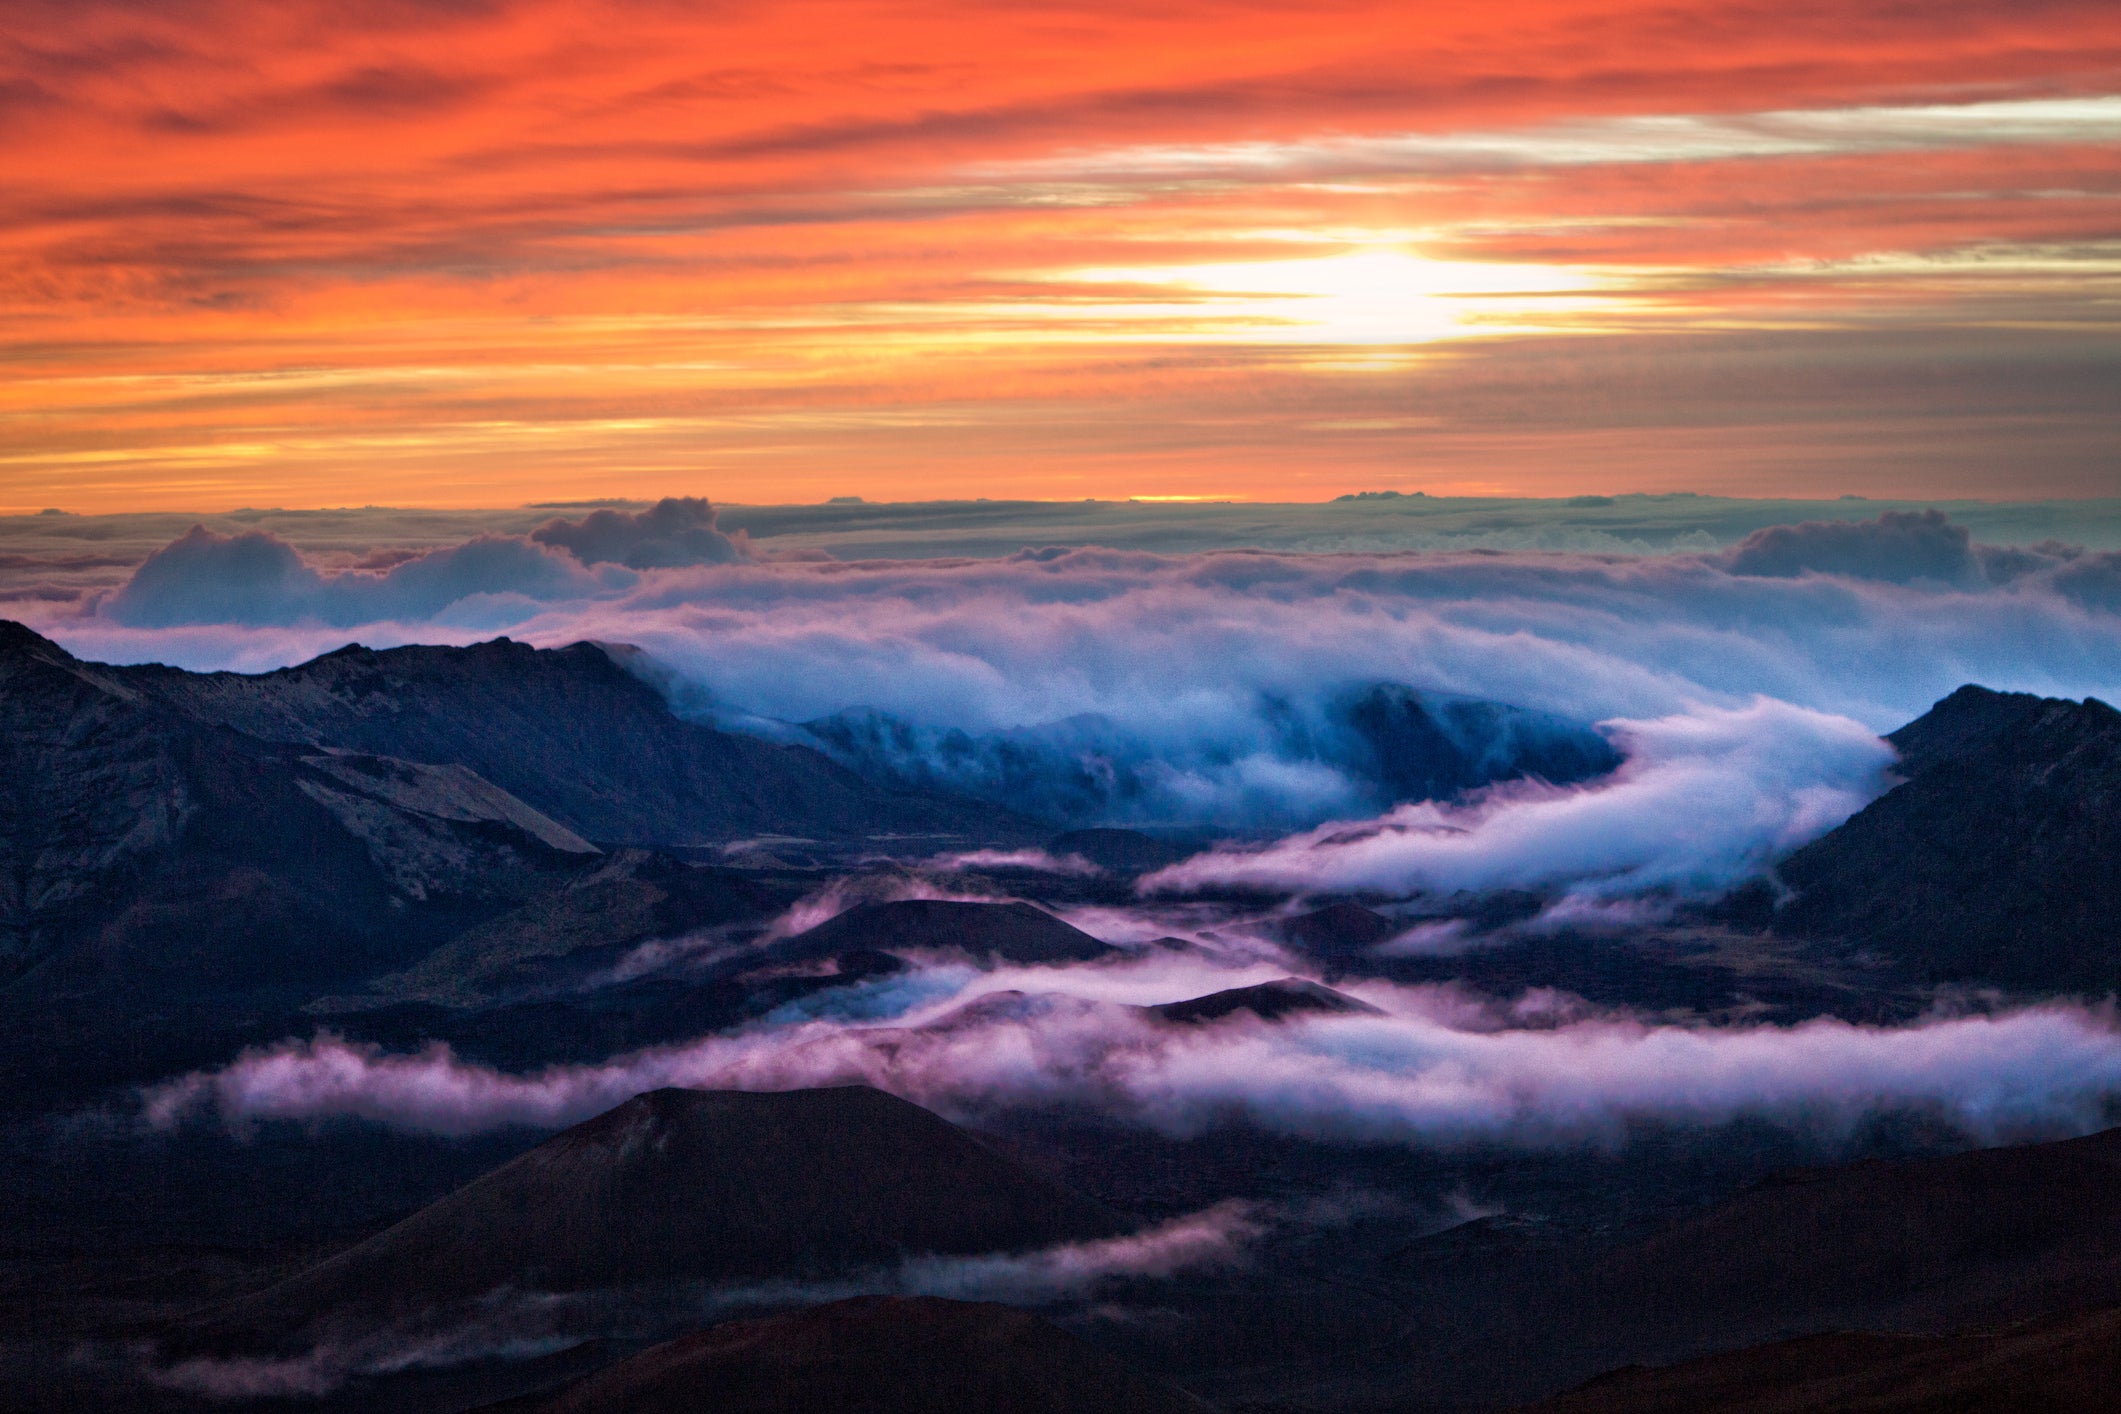 Watch the sun rise above the clouds at the Haleakala Volcano, 10,000 feet above sea level